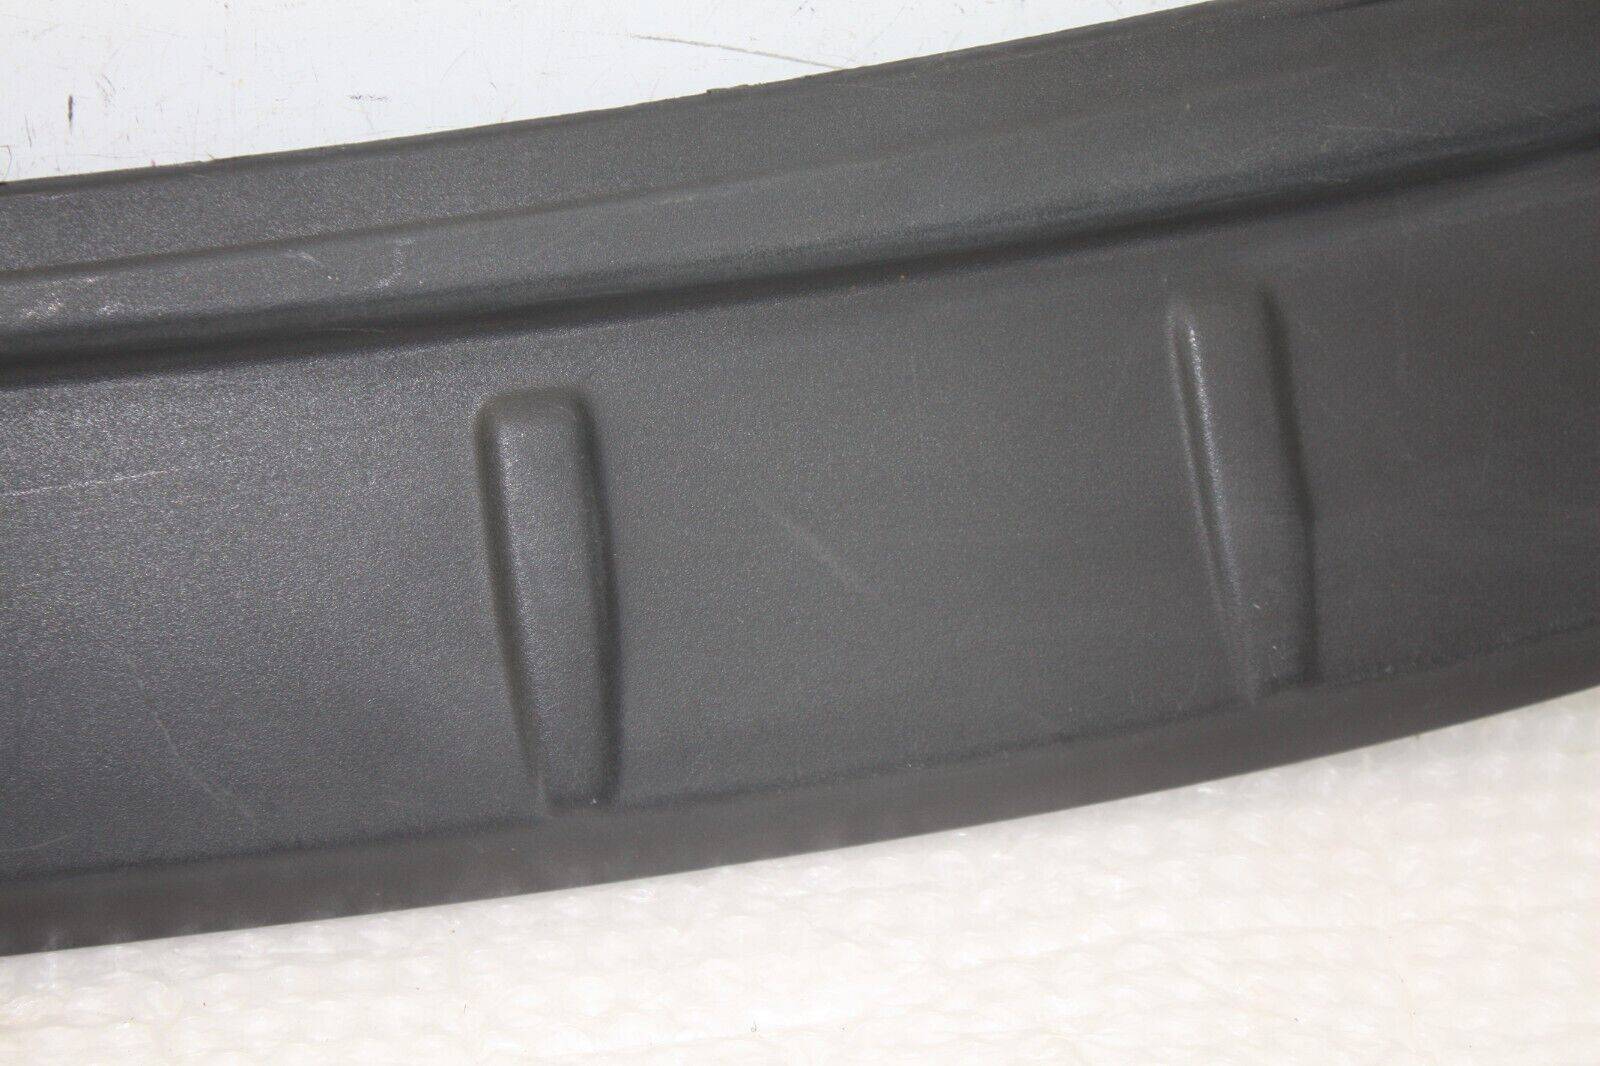 Volvo-XC60-Rear-Bumper-Protection-Cover-30764525-Genuine-FIXING-DAMAGED-176362657810-8